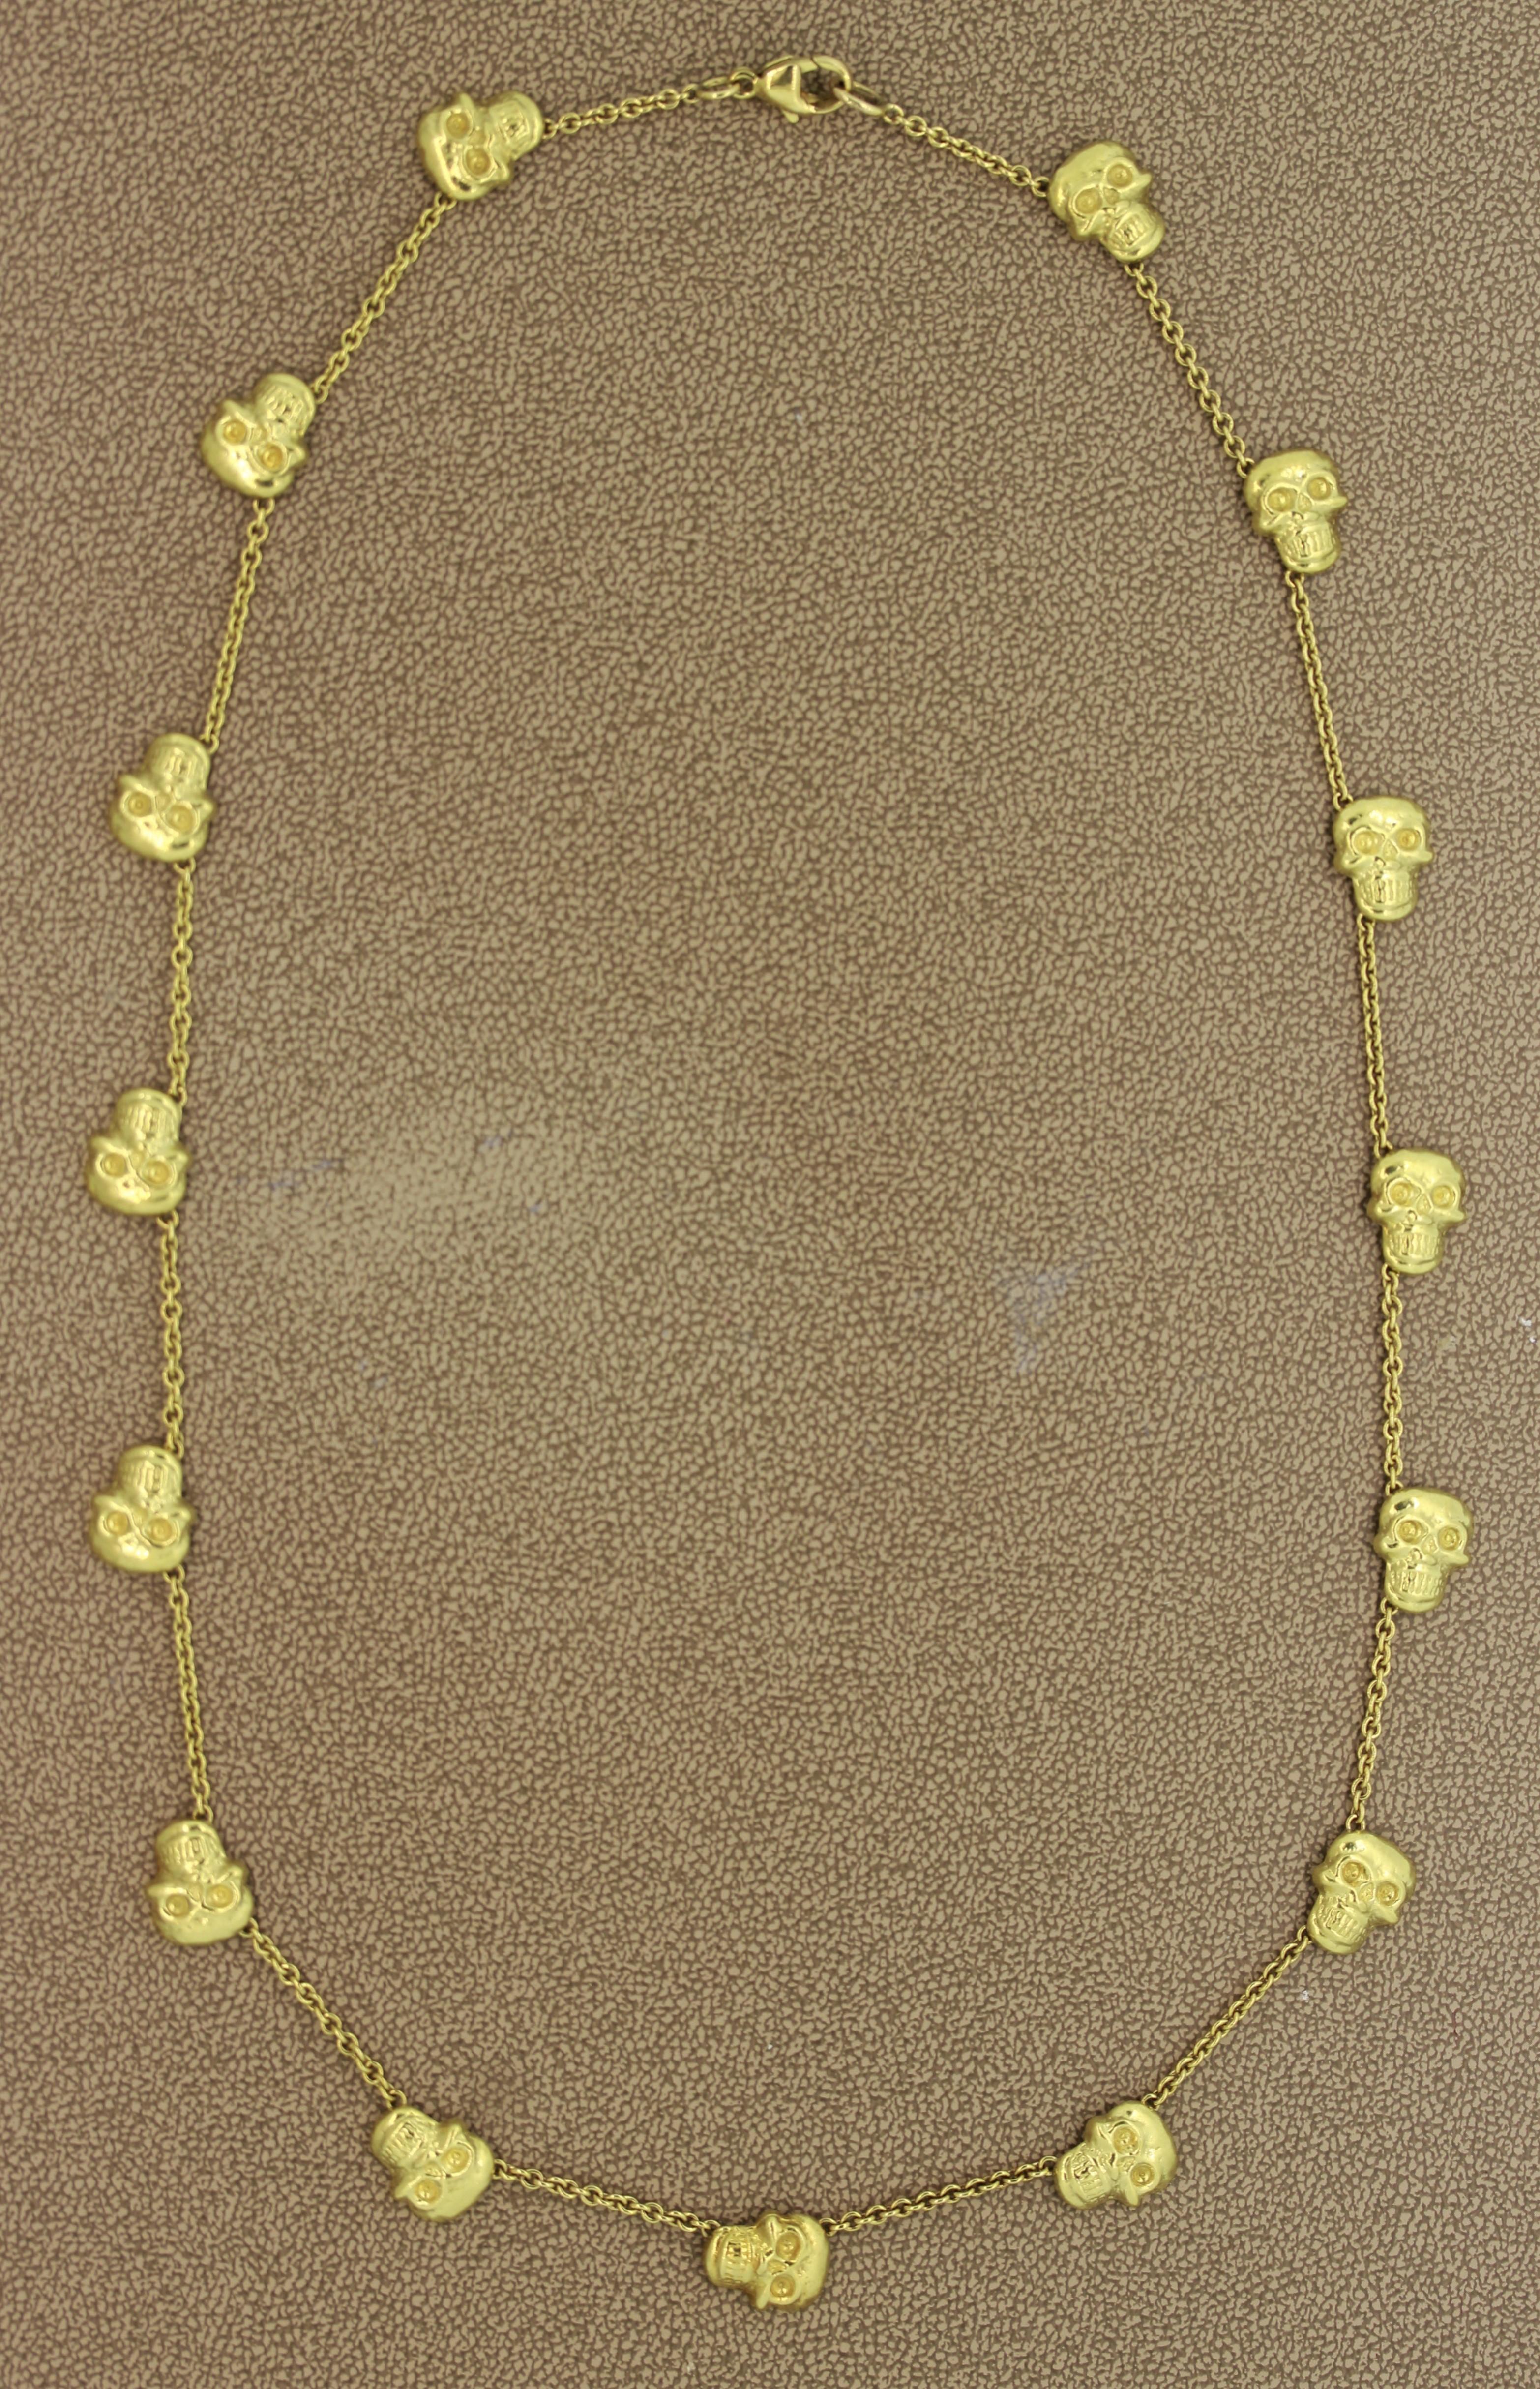 An 18k gold necklace featuring 15 handmade skulls set along the chain. The necklace is 20 inches long.